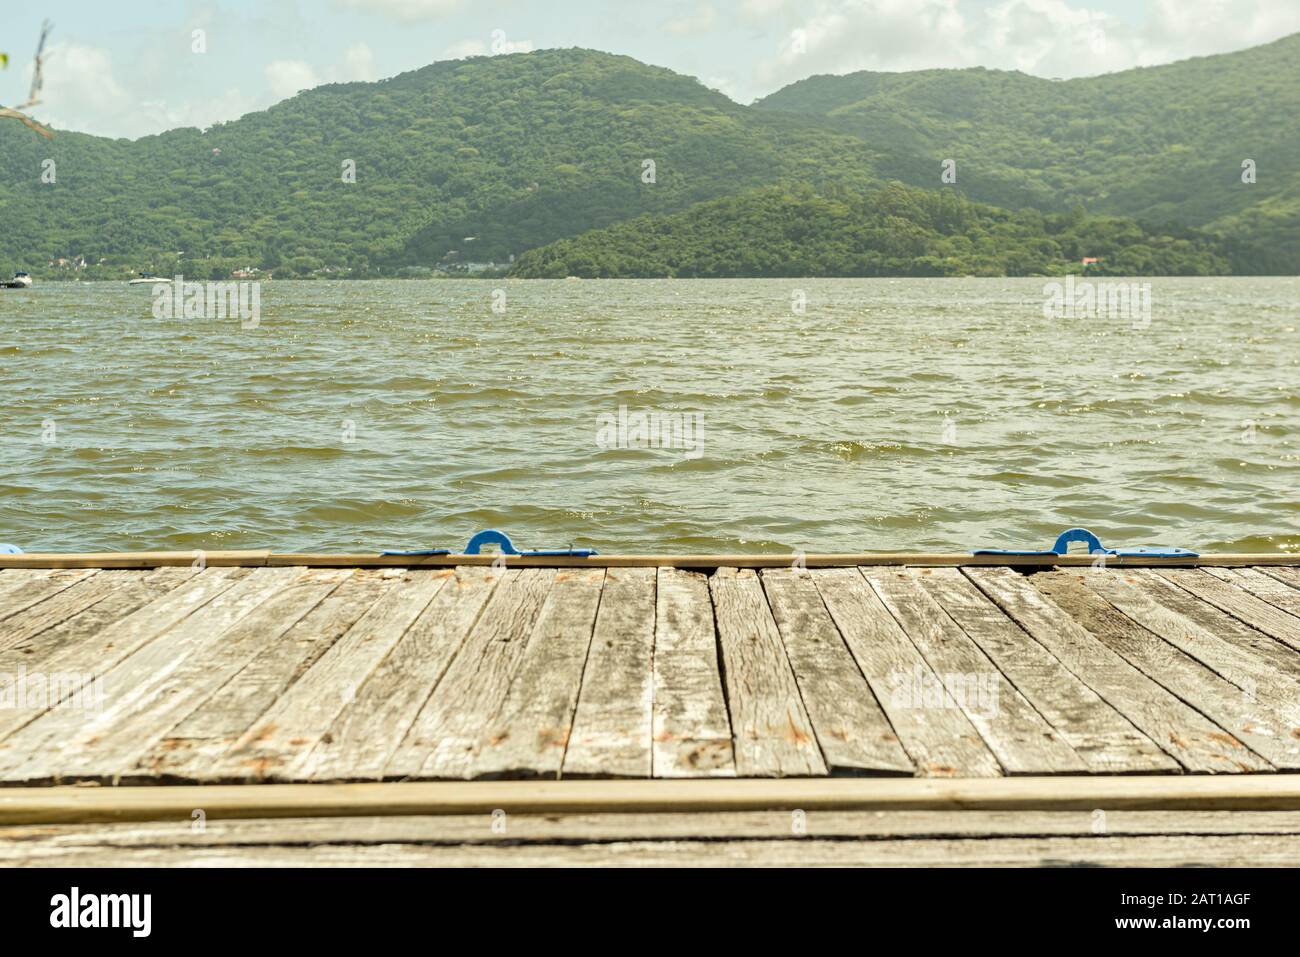 Old wooden pier over a lake (Lagoa da Conceição - Florianopolis - Brazil). Lake with a ripples surrounded by vegetation and mountains on a sunny day. Stock Photo